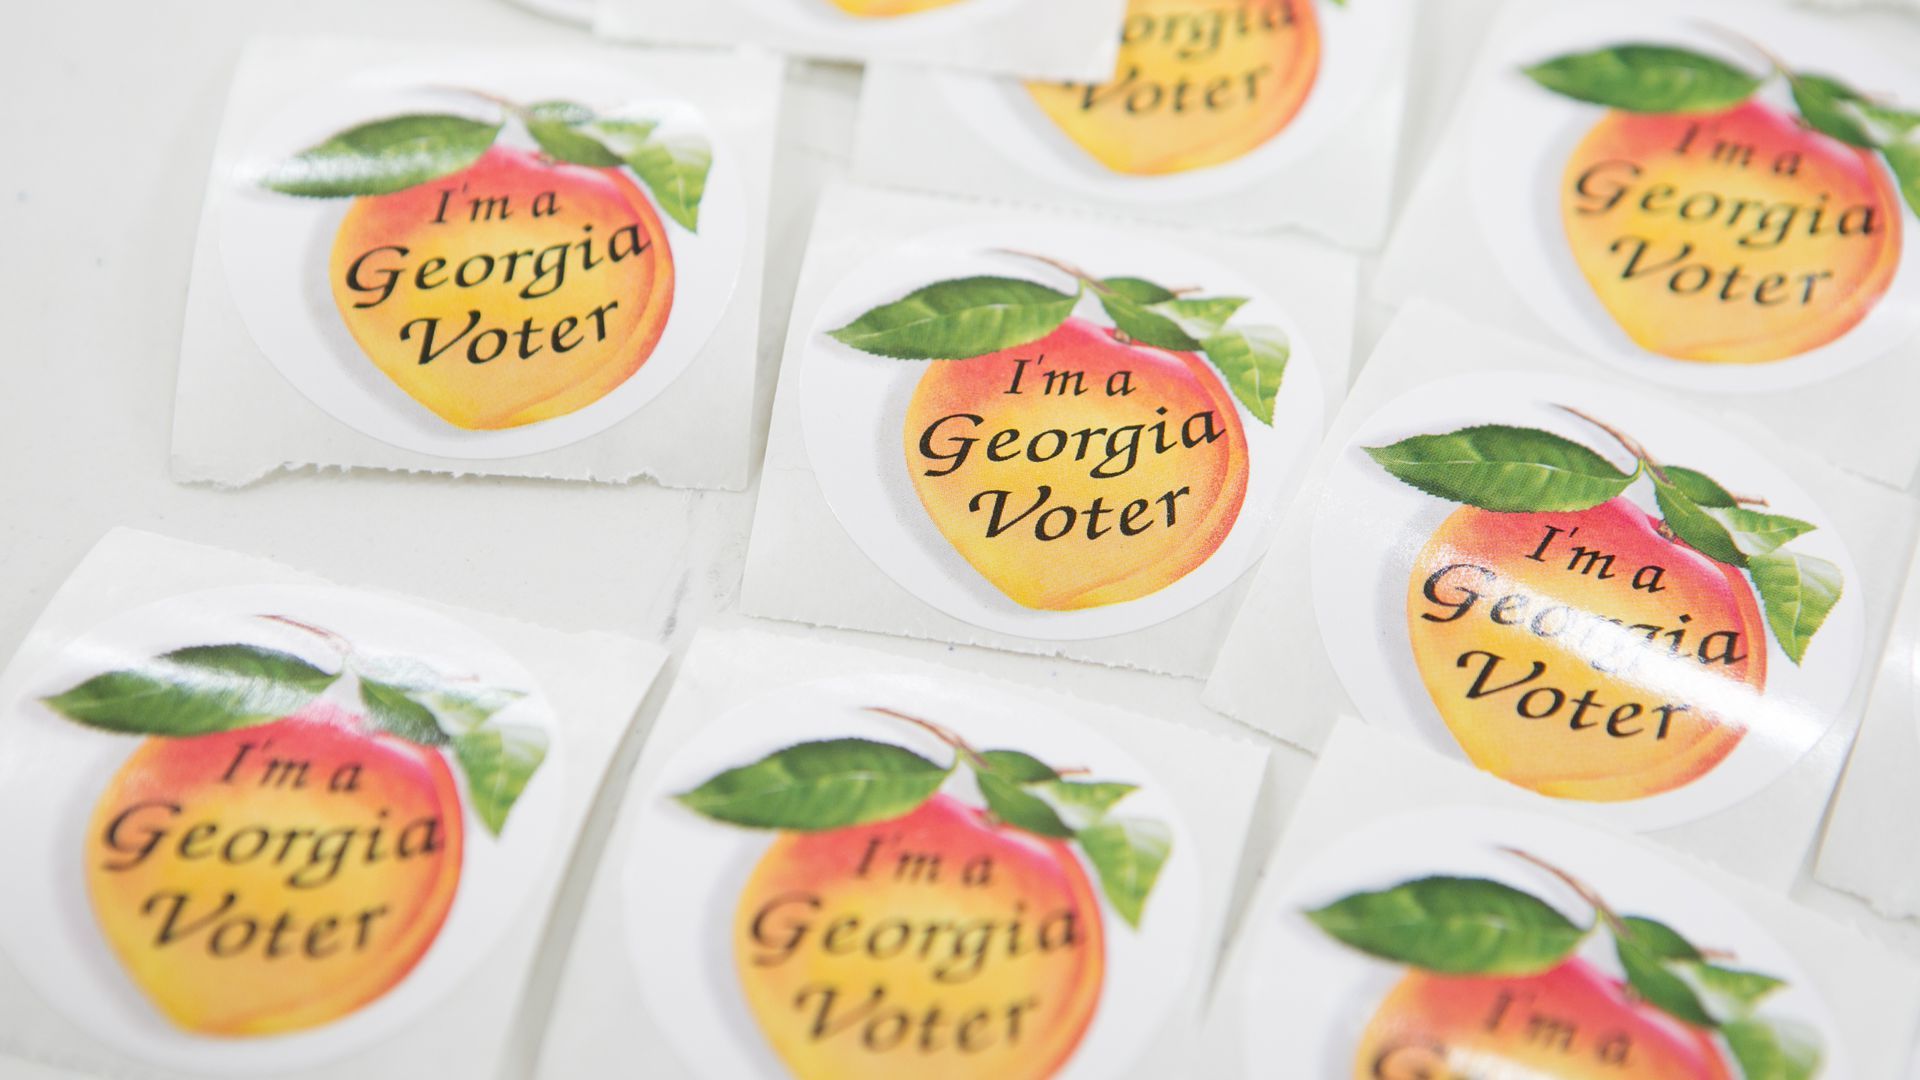 Stickers of a peach, saying "I'm a Georgia voter"